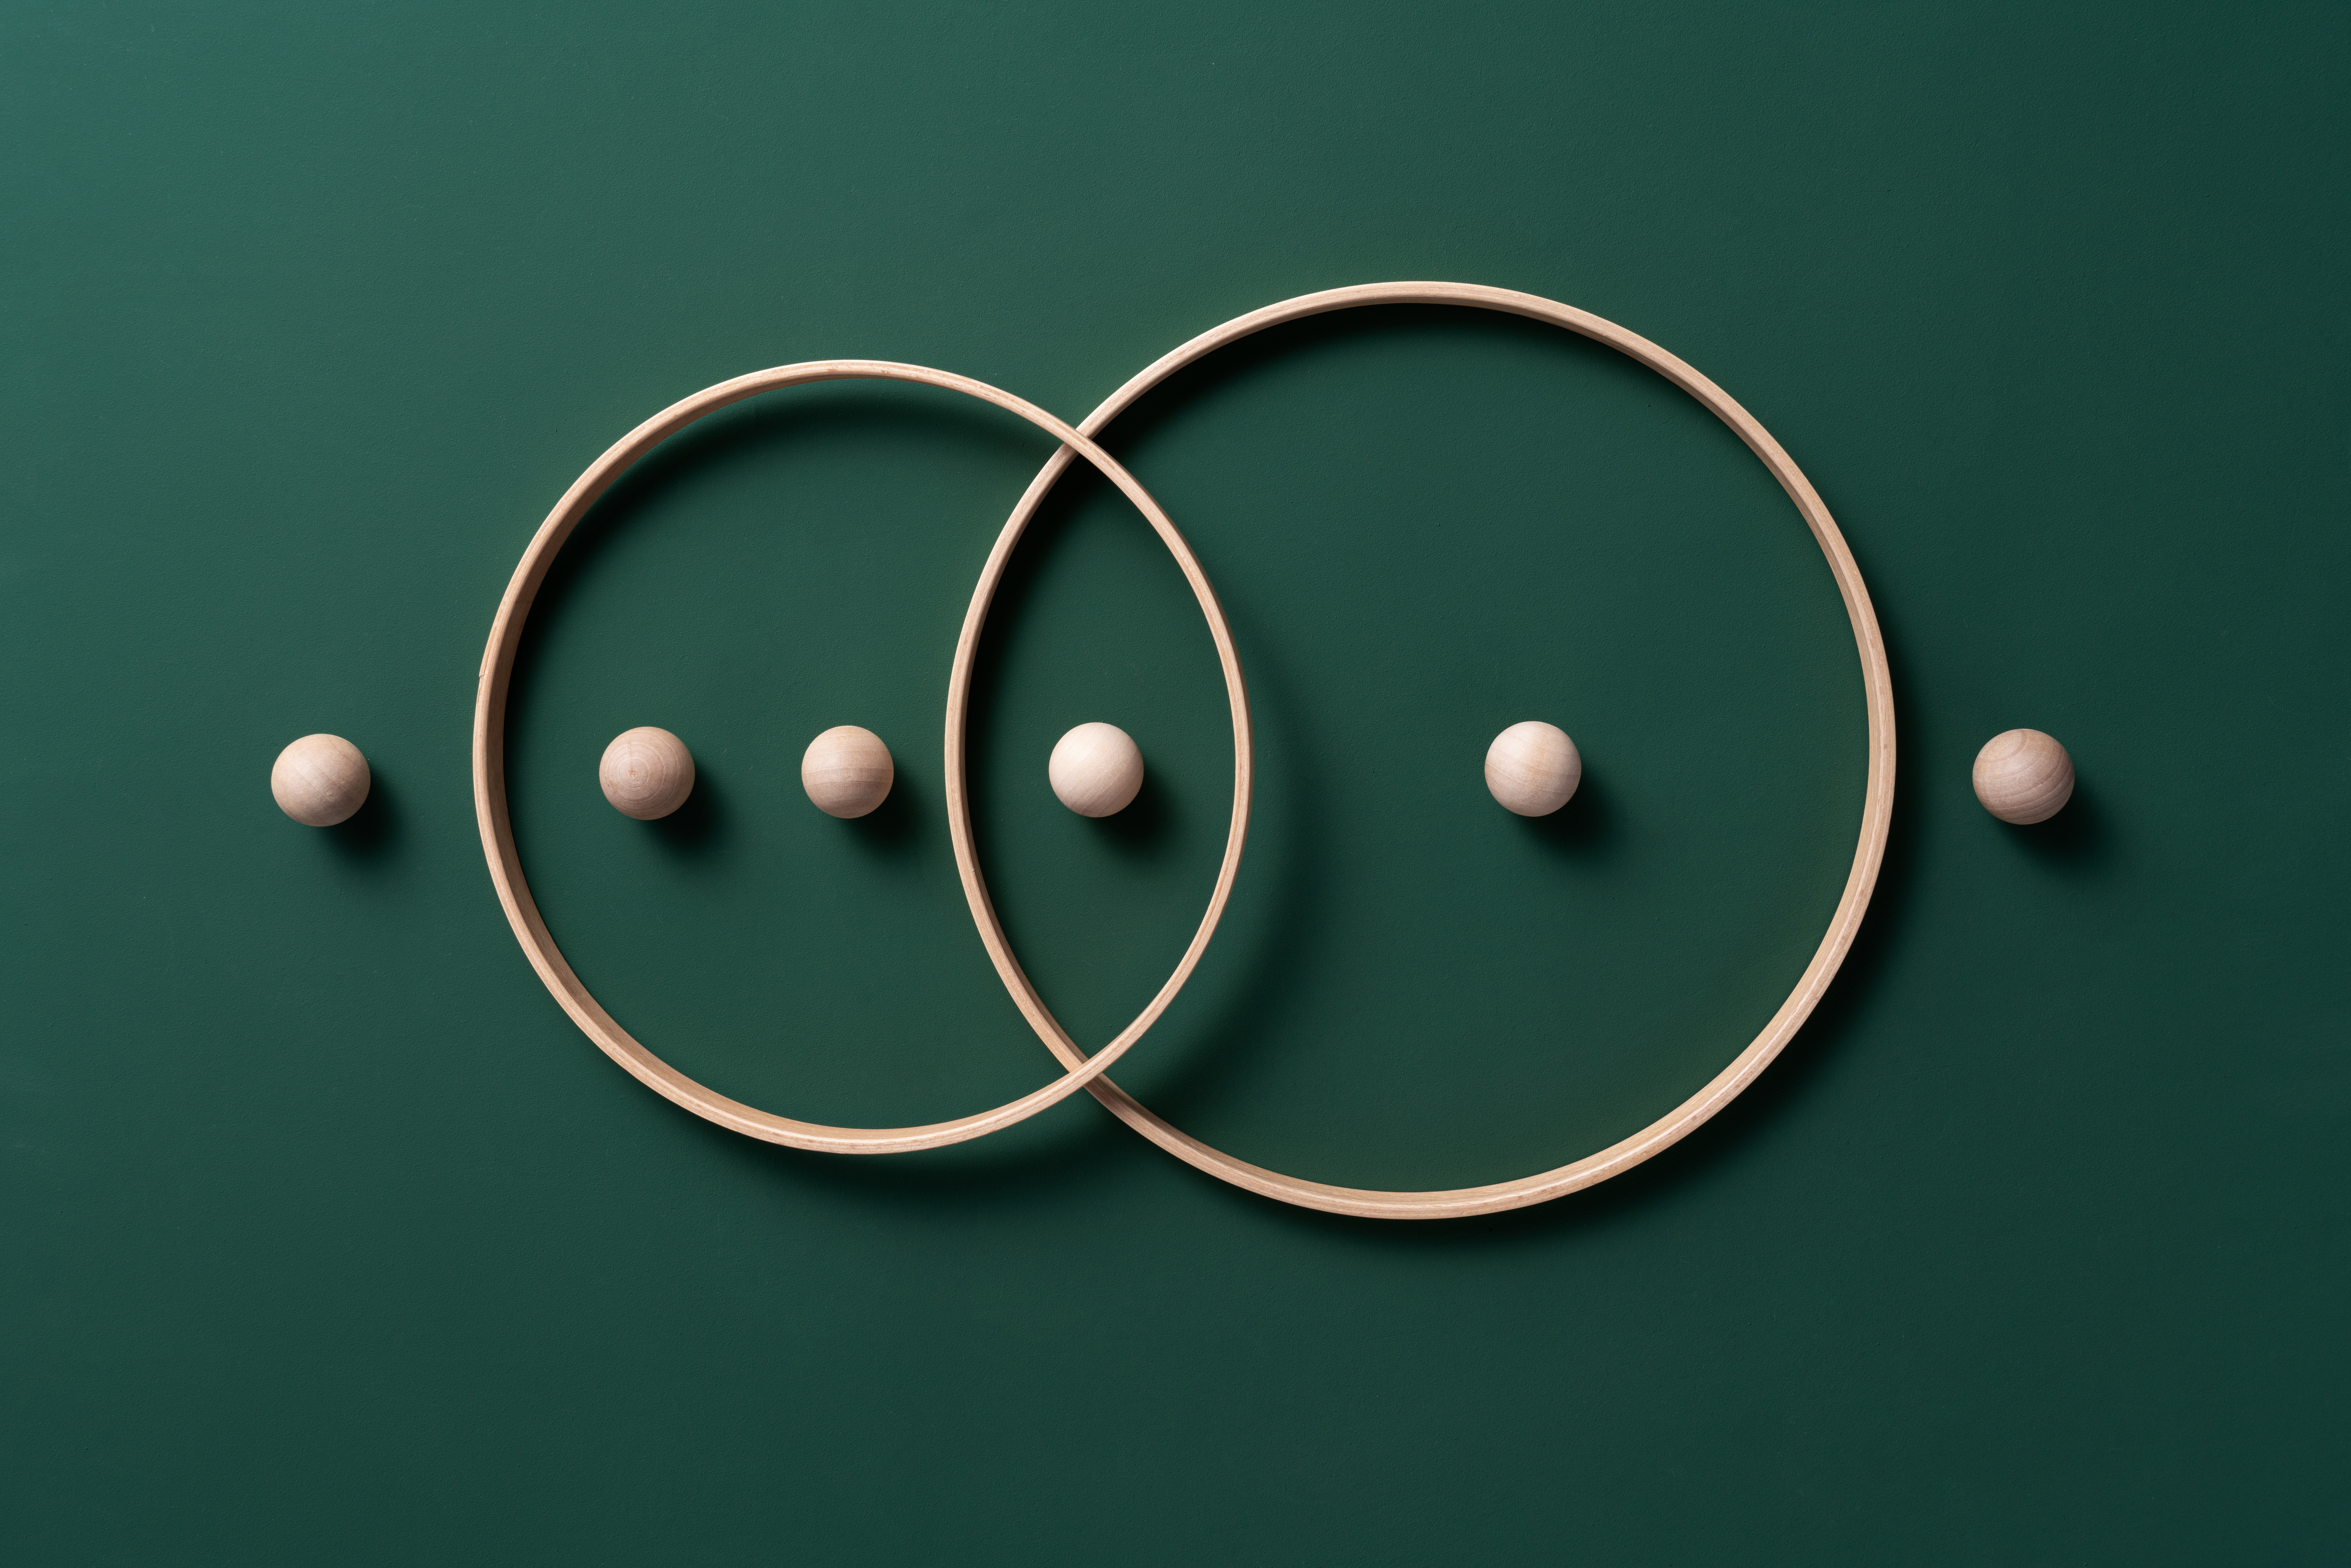 Image of intersecting rings with balls on a green background.